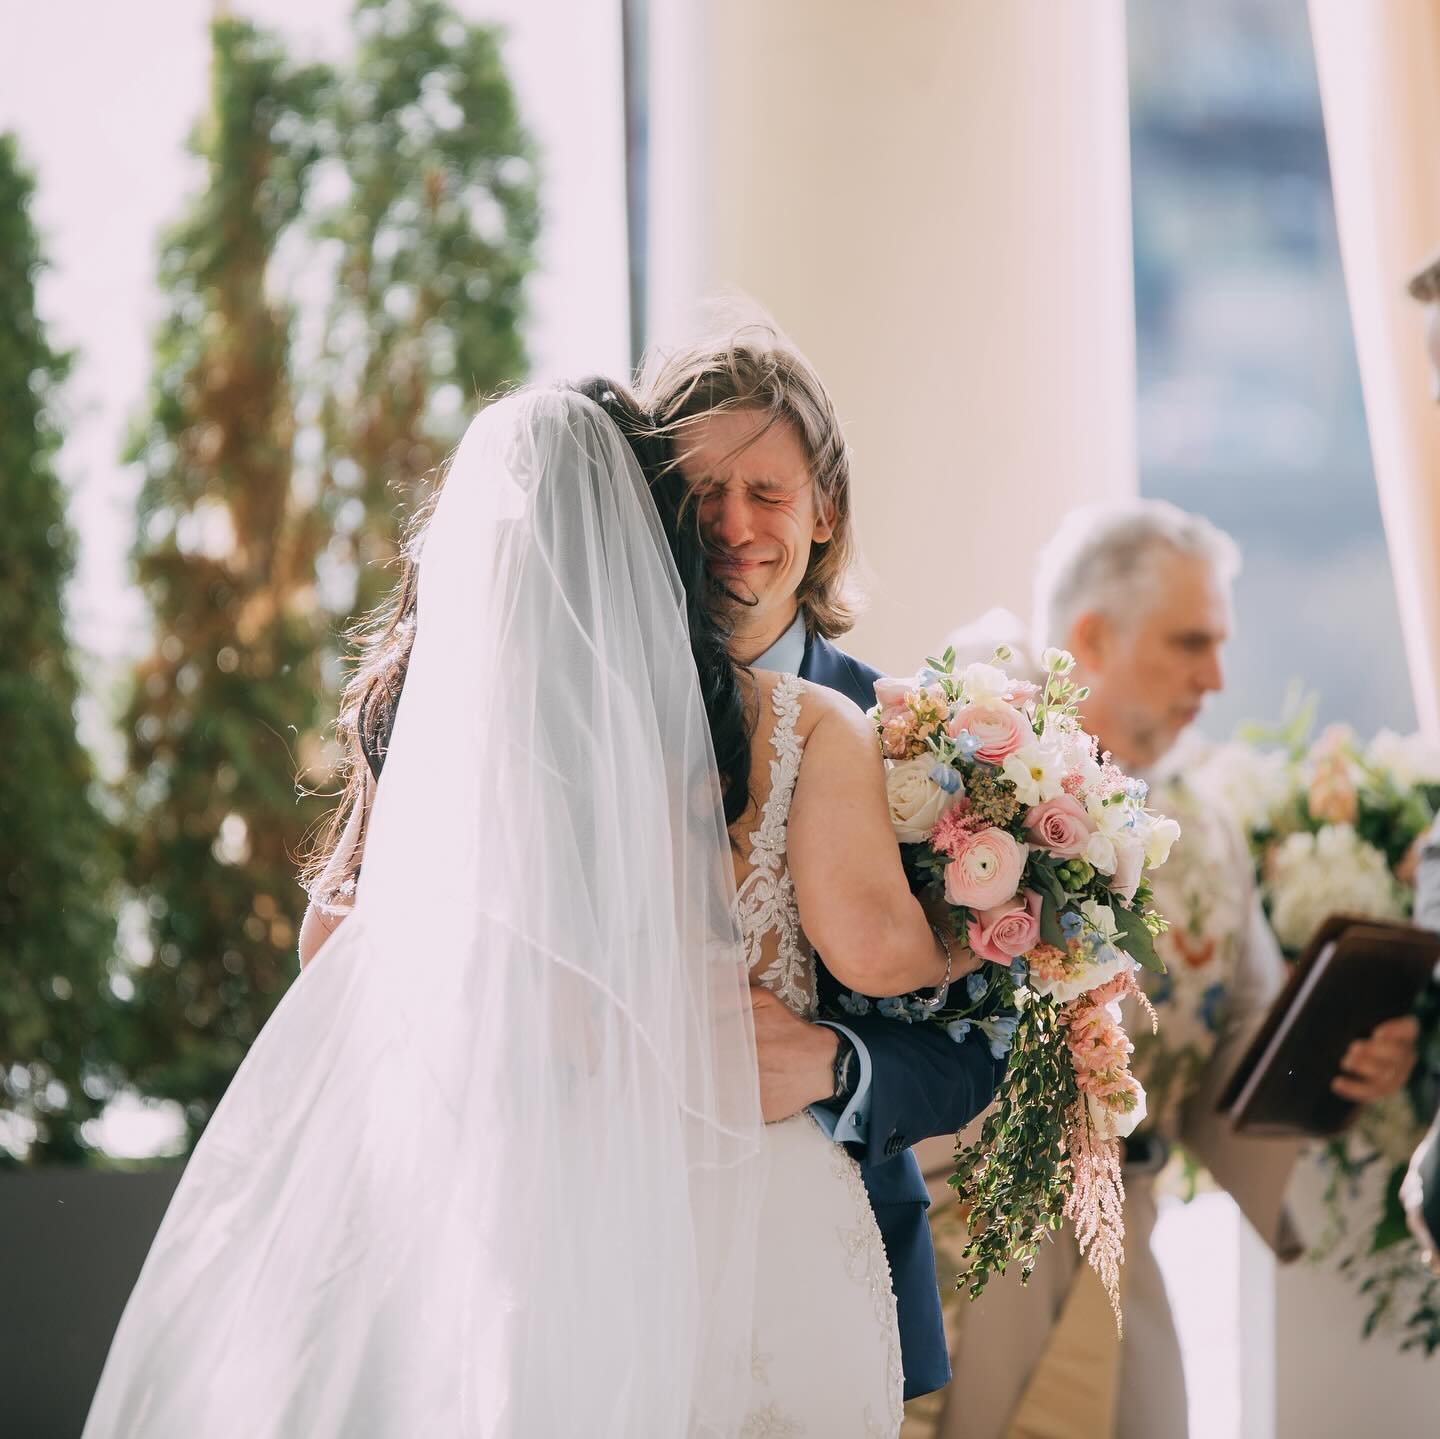 No caption needed to illustrate the vibe from Stef &amp; Nick&rsquo;s gorgeous wedding at Water Works&hellip;these pictures are cathartic and speak a thousand words 🥹🕊️🌸💍

&amp; @hannahsnyderweddings so perfectly captured their deep love and warm